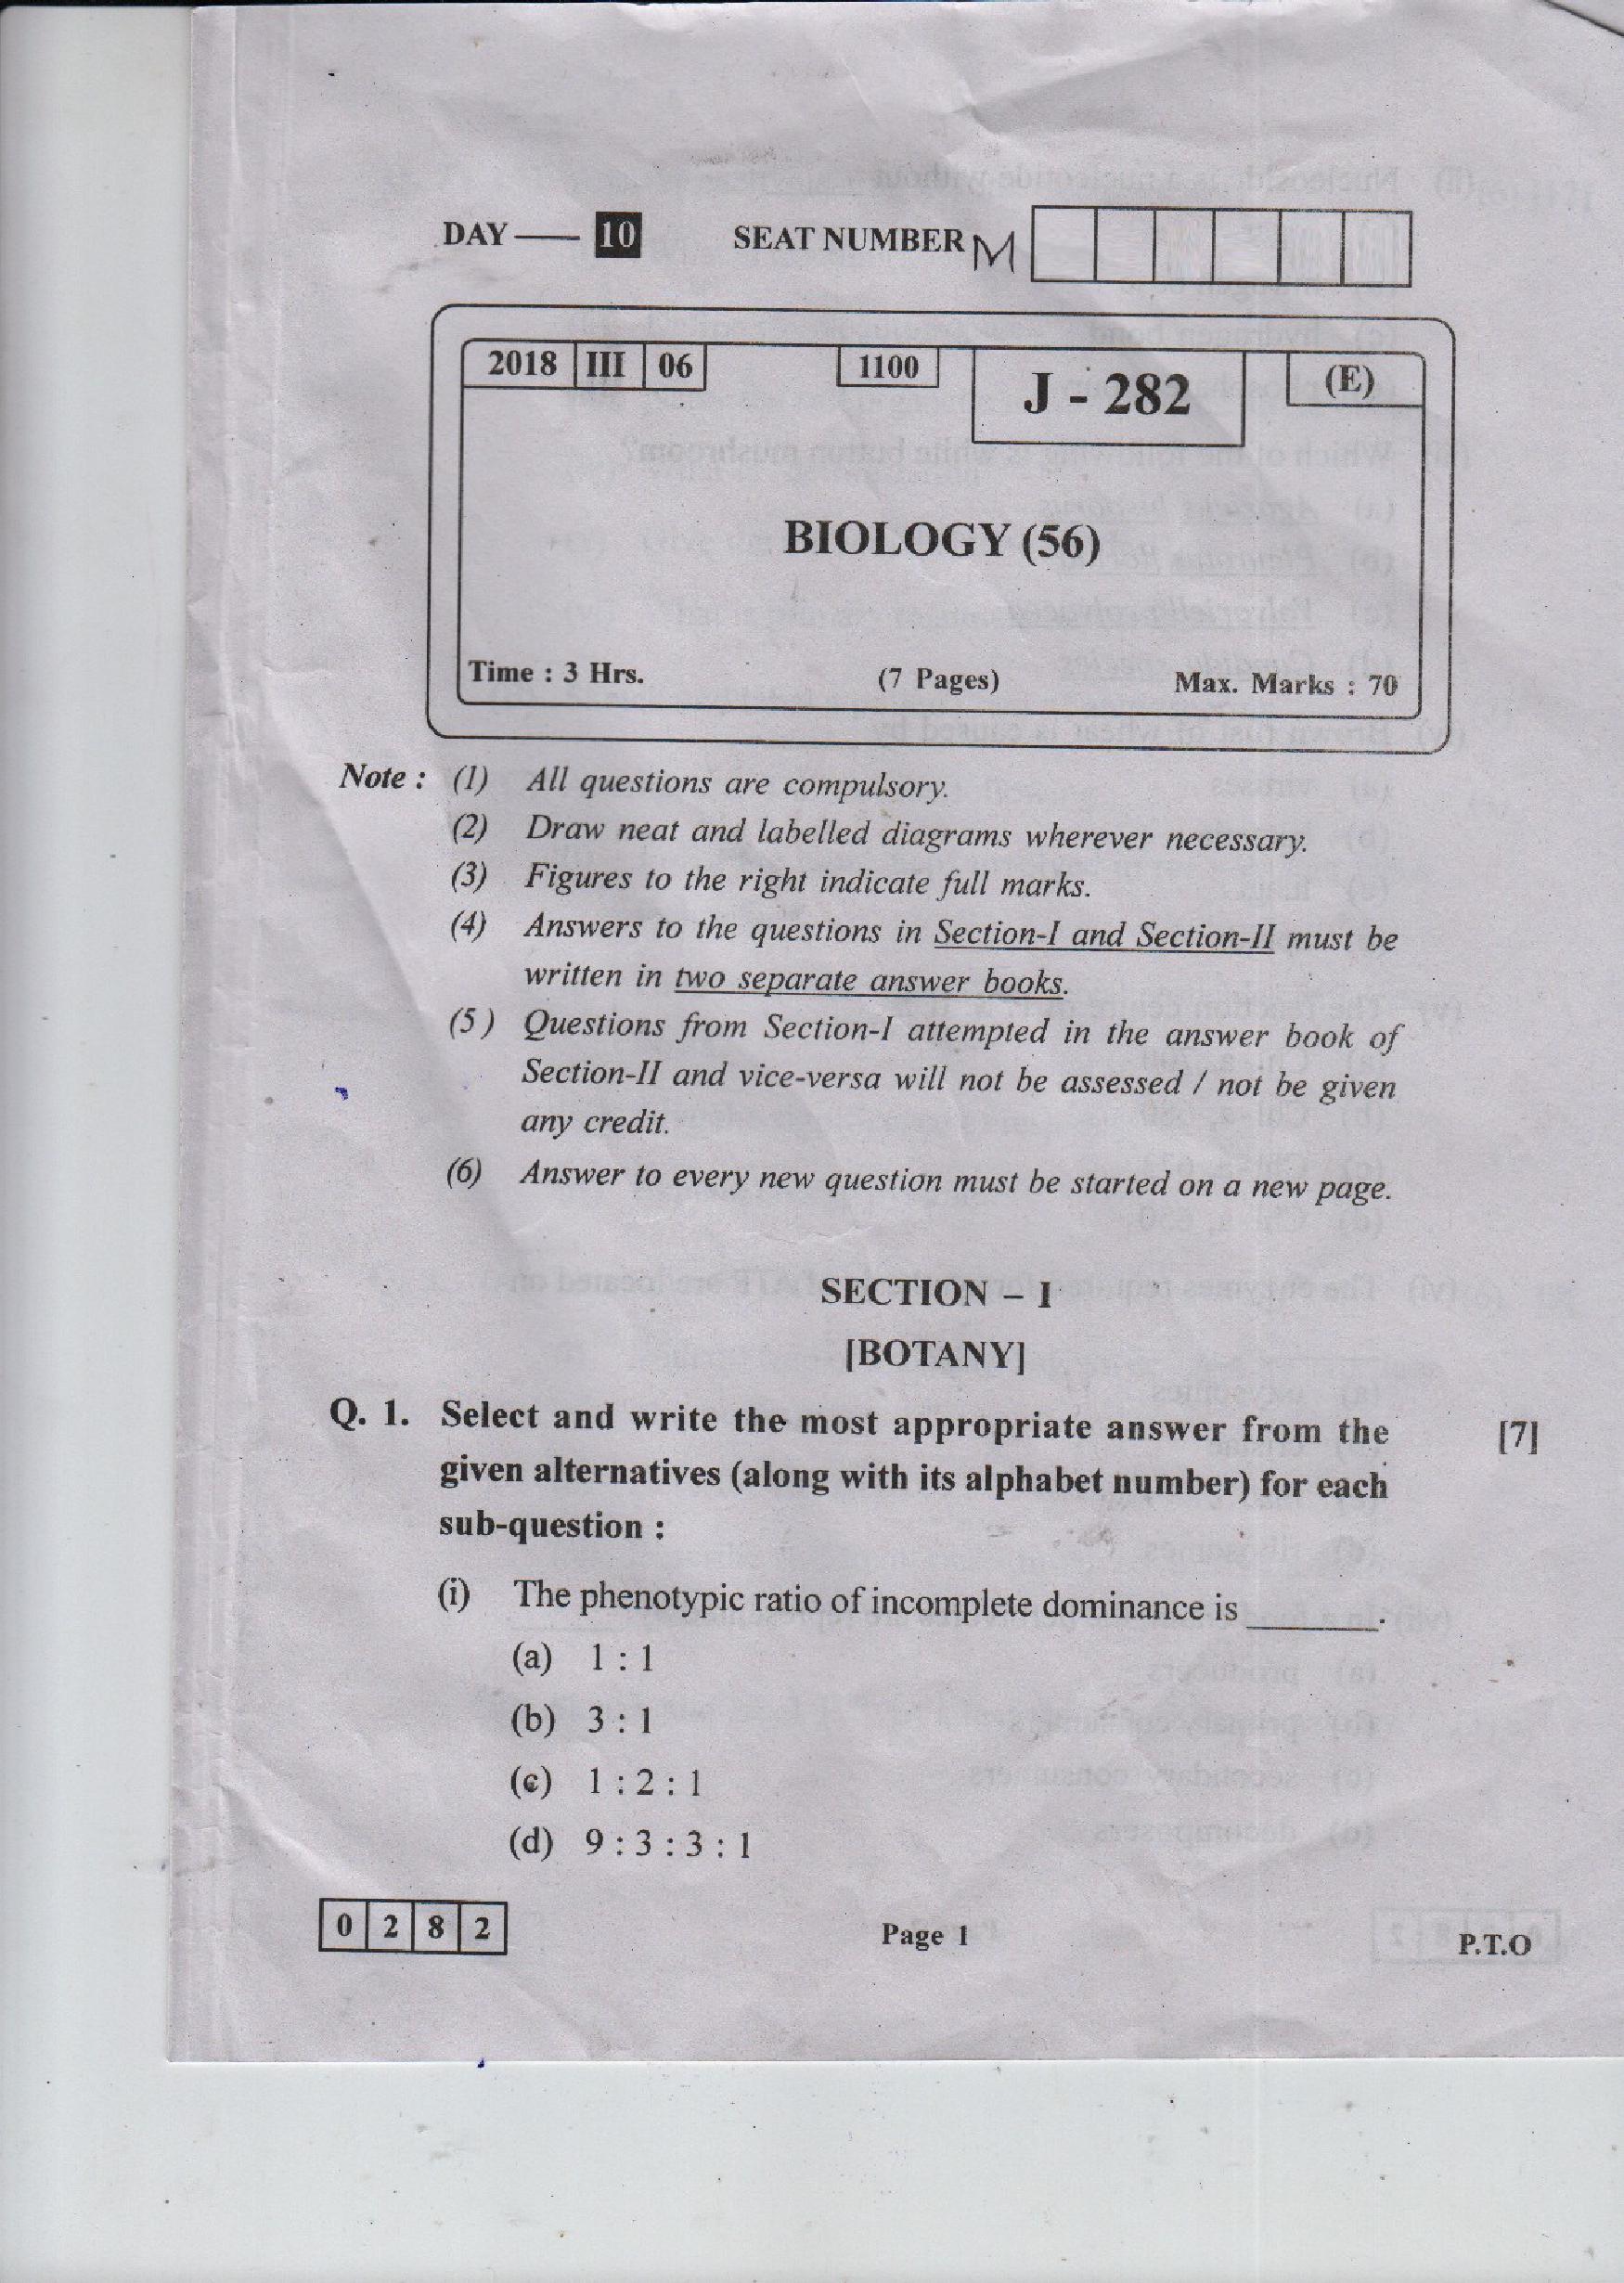 Maharashtra Class 12 Question Paper 2018 Biology - Page 1